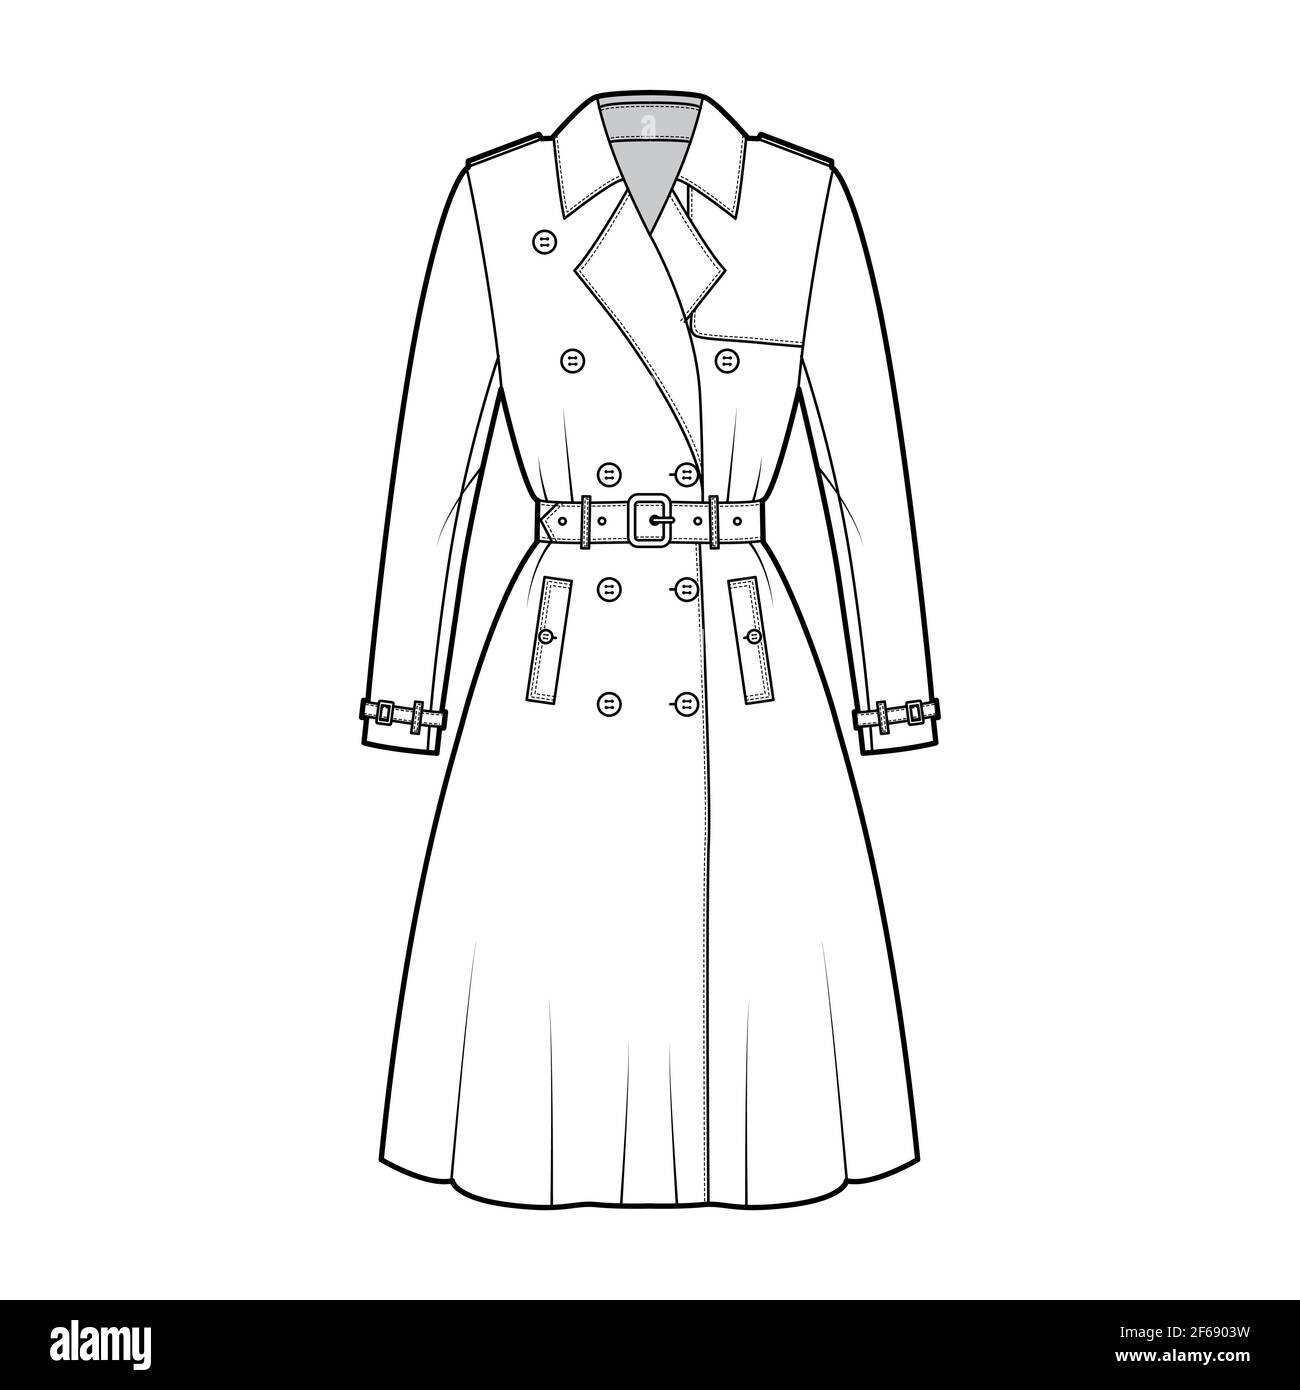 Full Trench coat technical fashion illustration with belt, long sleeves ...